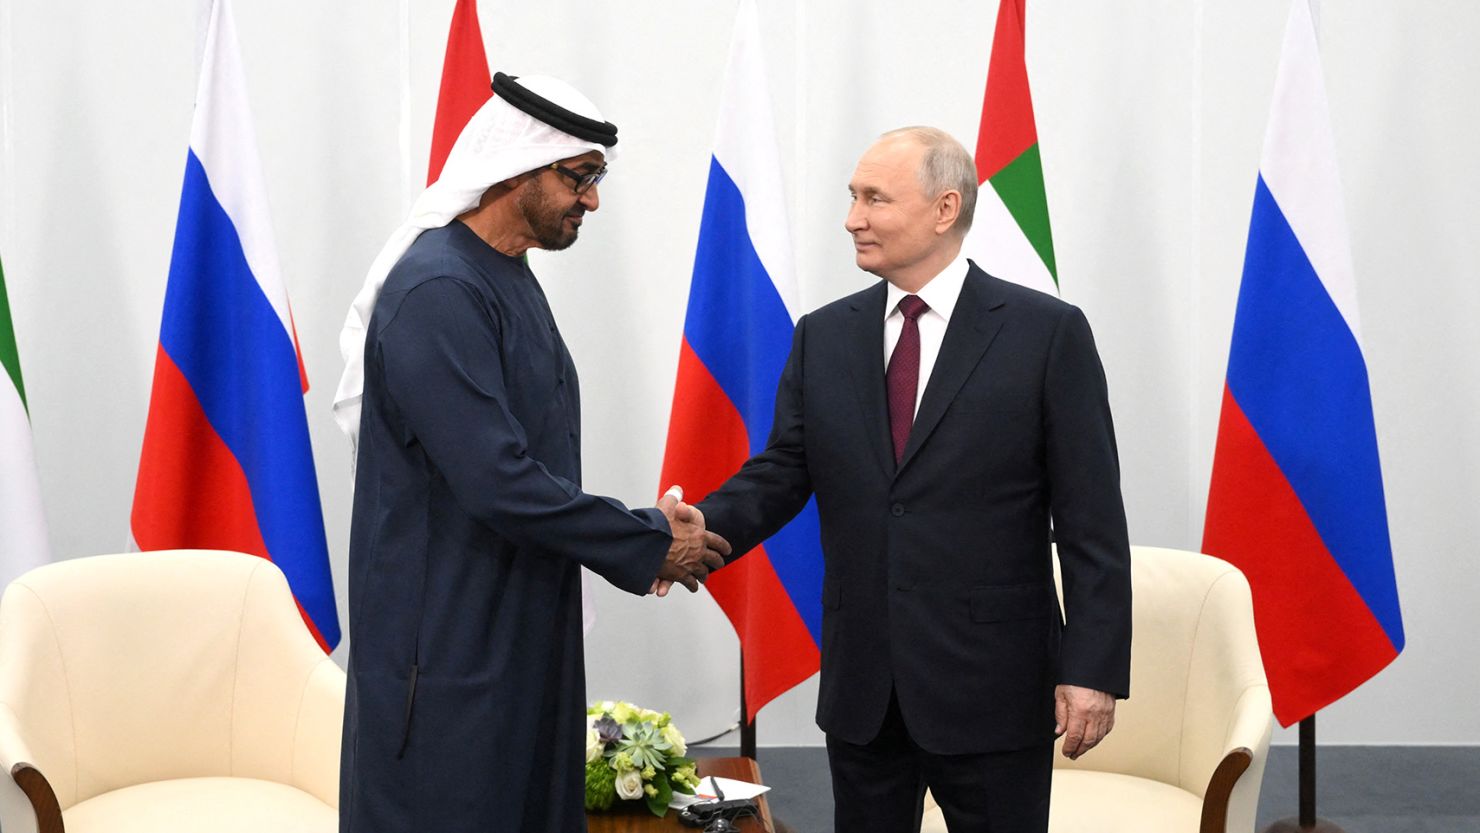 Russian President Vladimir Putin and President of the United Arab Emirates Sheikh Mohammed bin Zayed Al Nahyan shake hands during a meeting at the St. Petersburg International Economic Forum (SPIEF) in Saint Petersburg, Russia, on Friday.